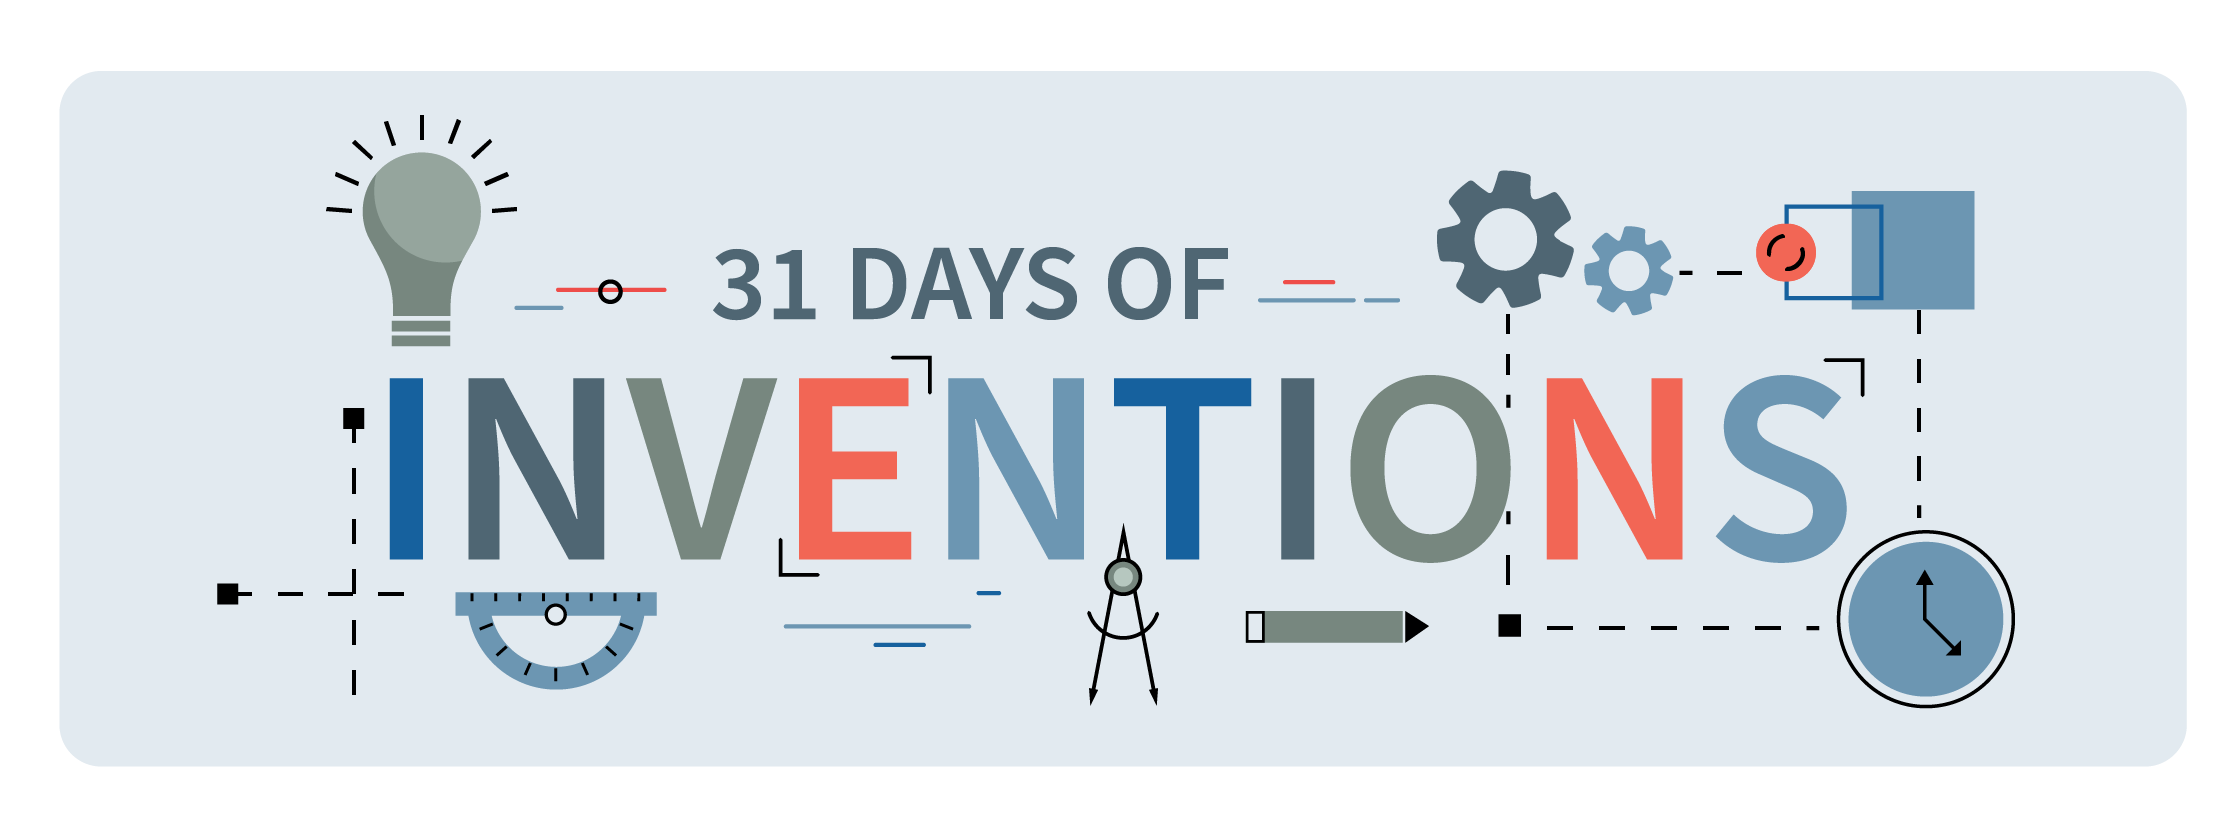 31 Days for Inventions Banner Image